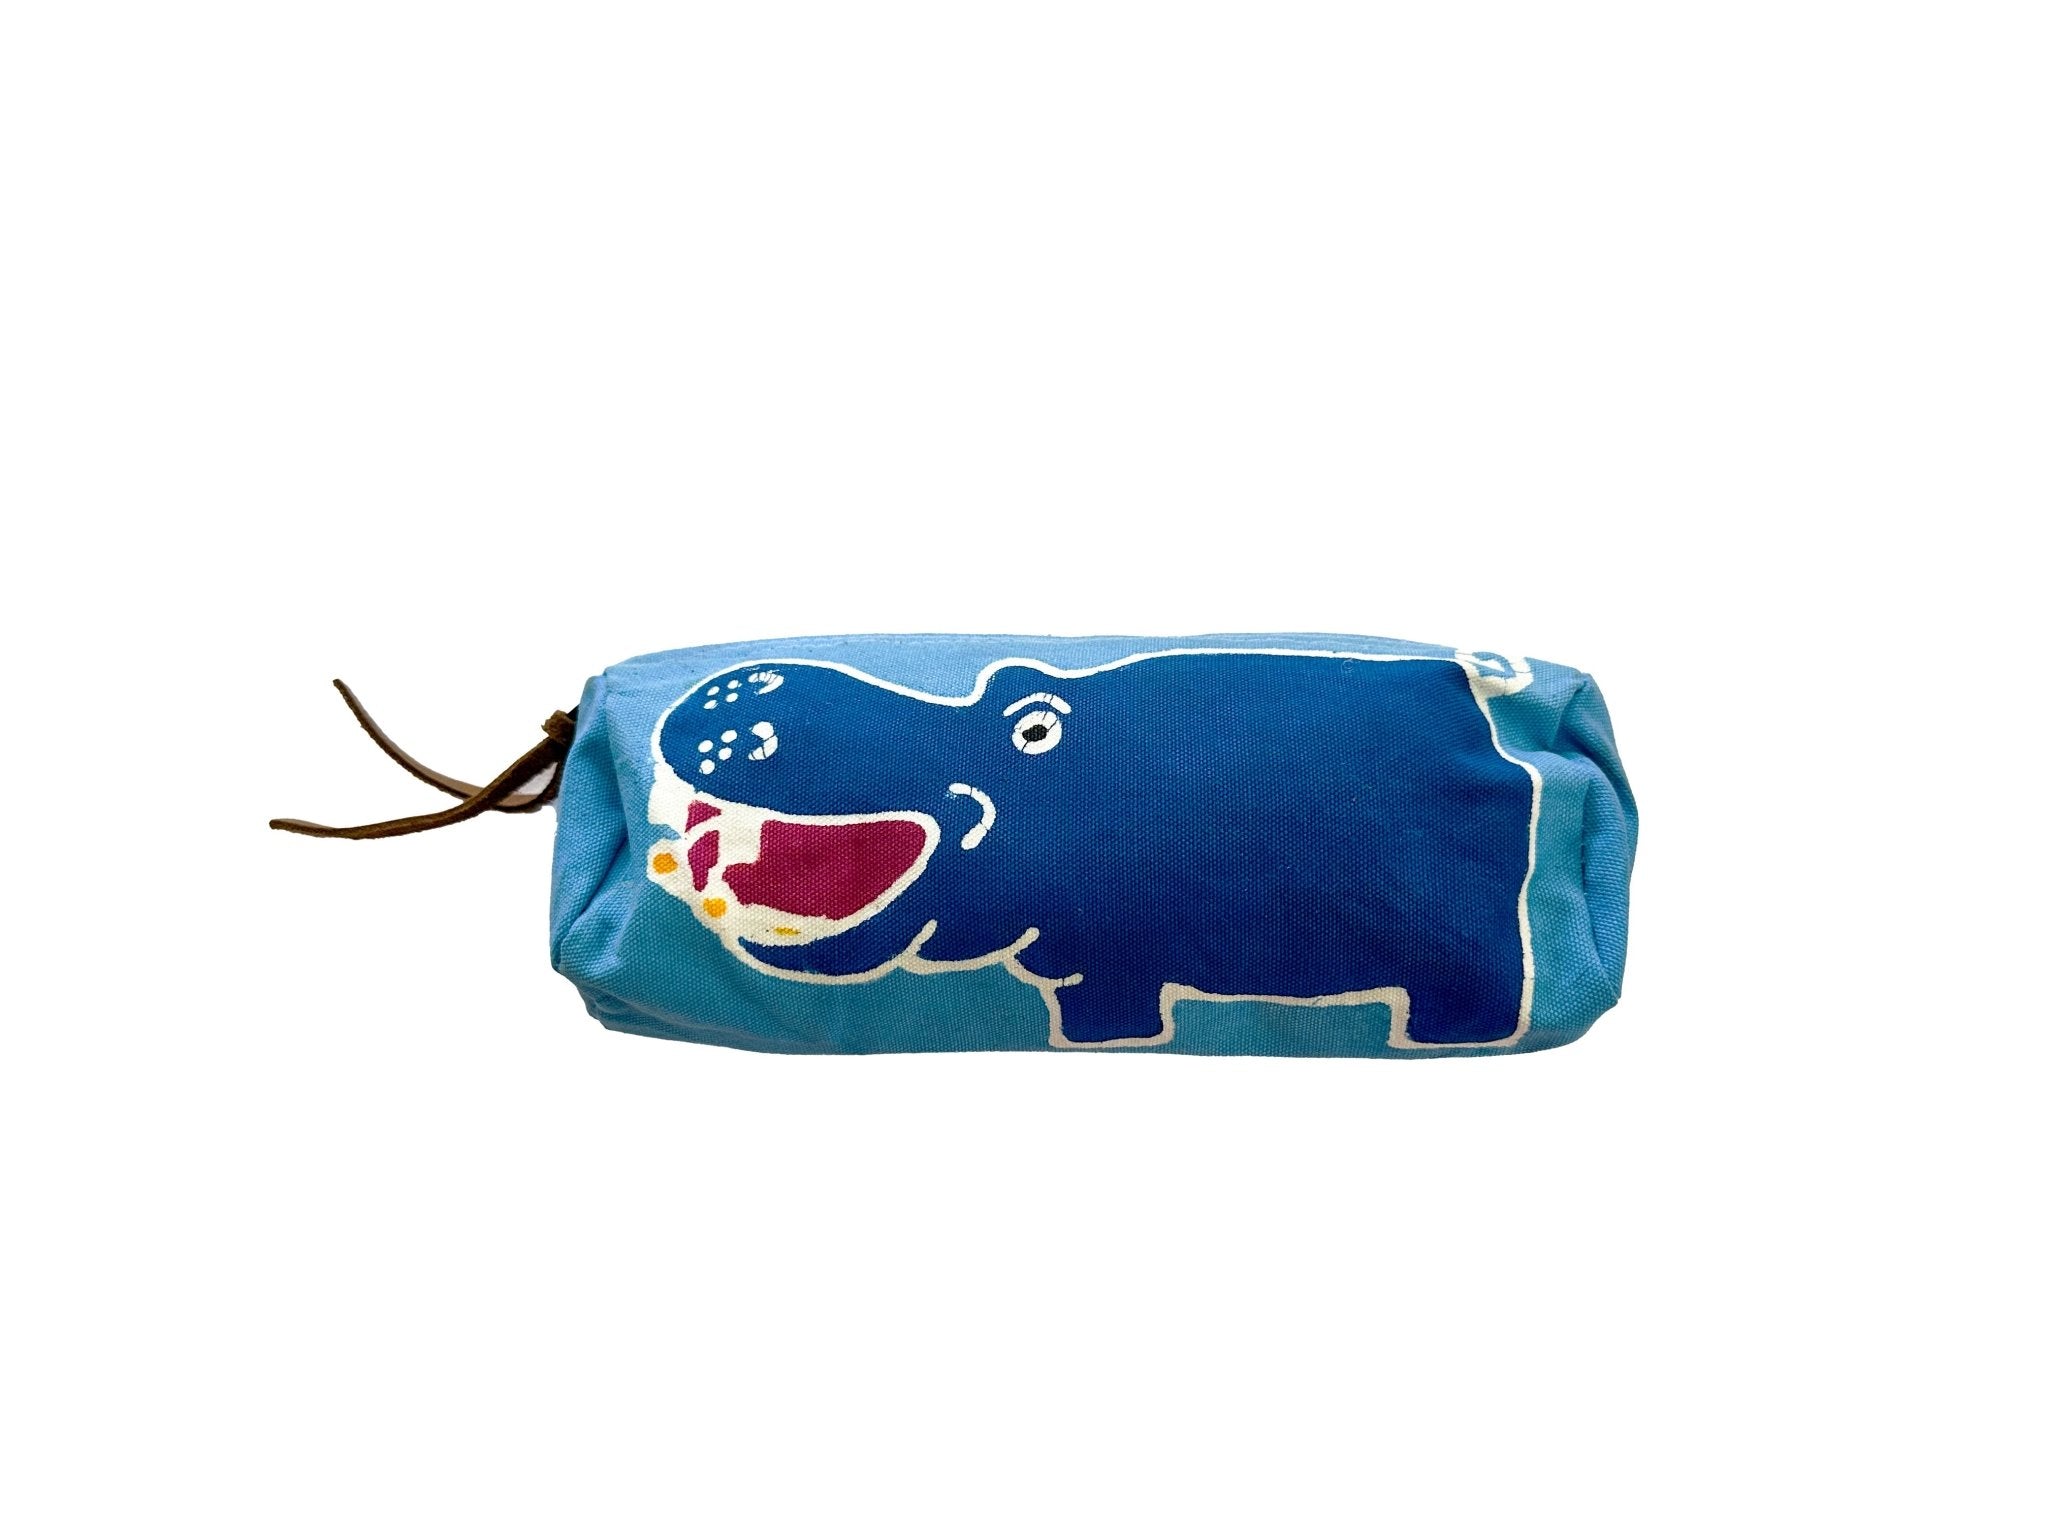 Hippo pencil case for kids, in bright blues, handcrafted in Africa